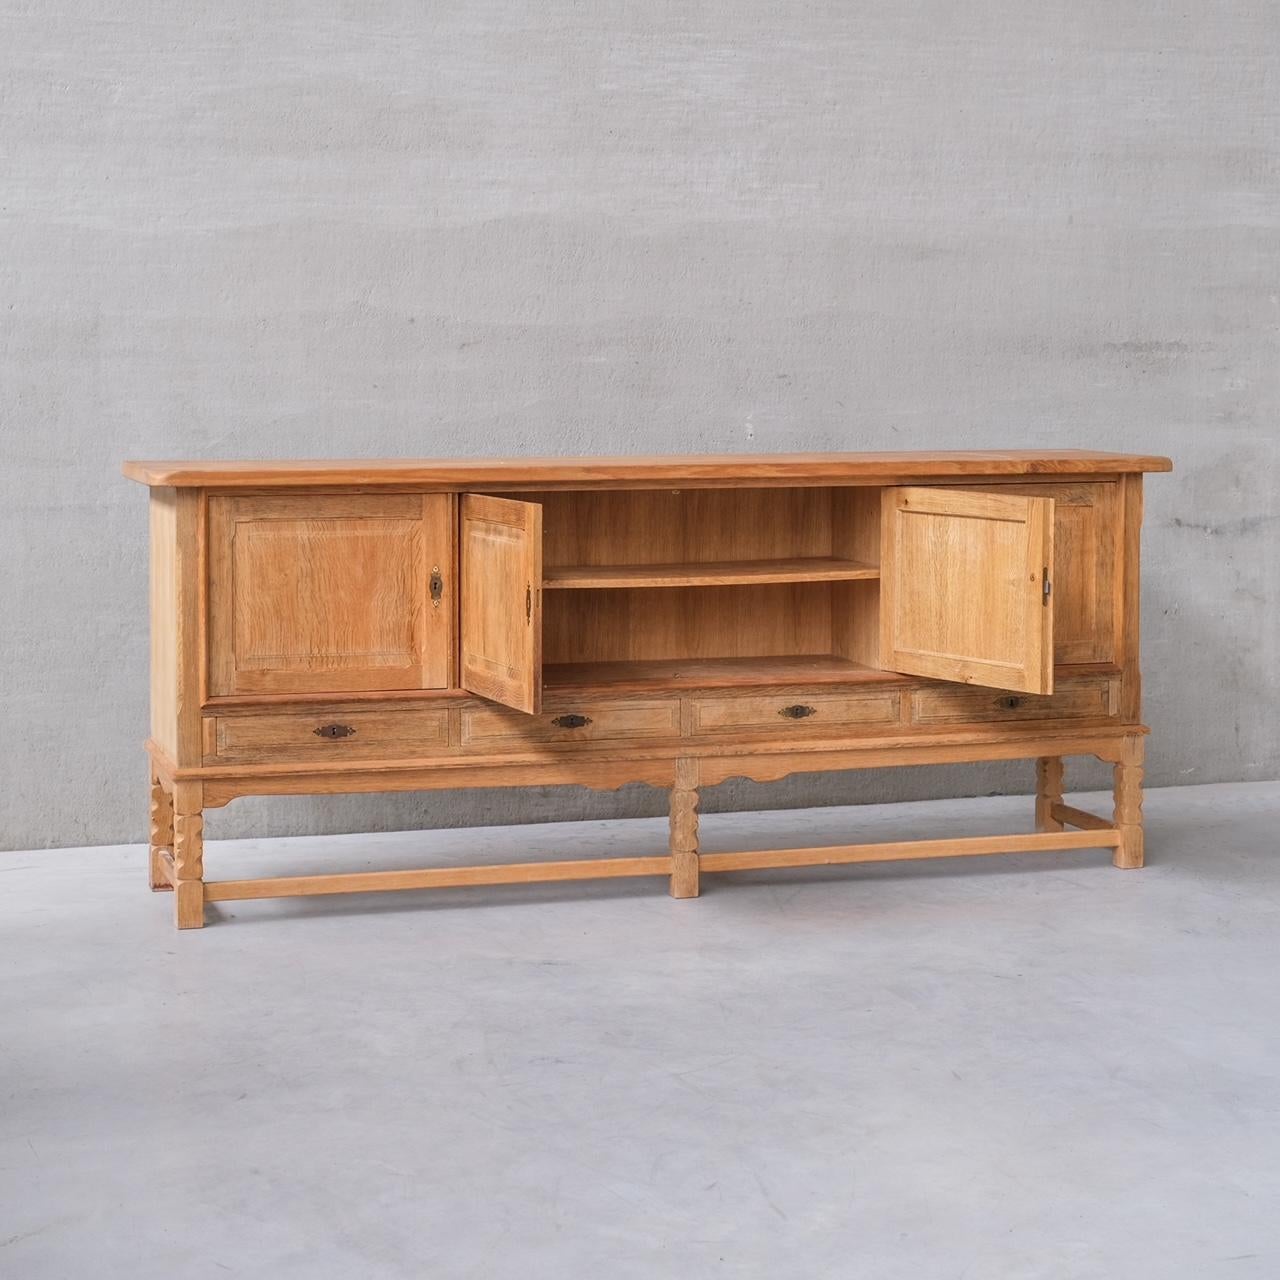 An oak sideboard by Henning (Henry) Kjaernulf.

Denmark, c1960s.

Cabinet doors over drawers.

Good vintage condition, some scuffs and wear commensurate with age.

Location: Belgium Gallery.

Dimensions: 92 H x 225 W x 50 D in